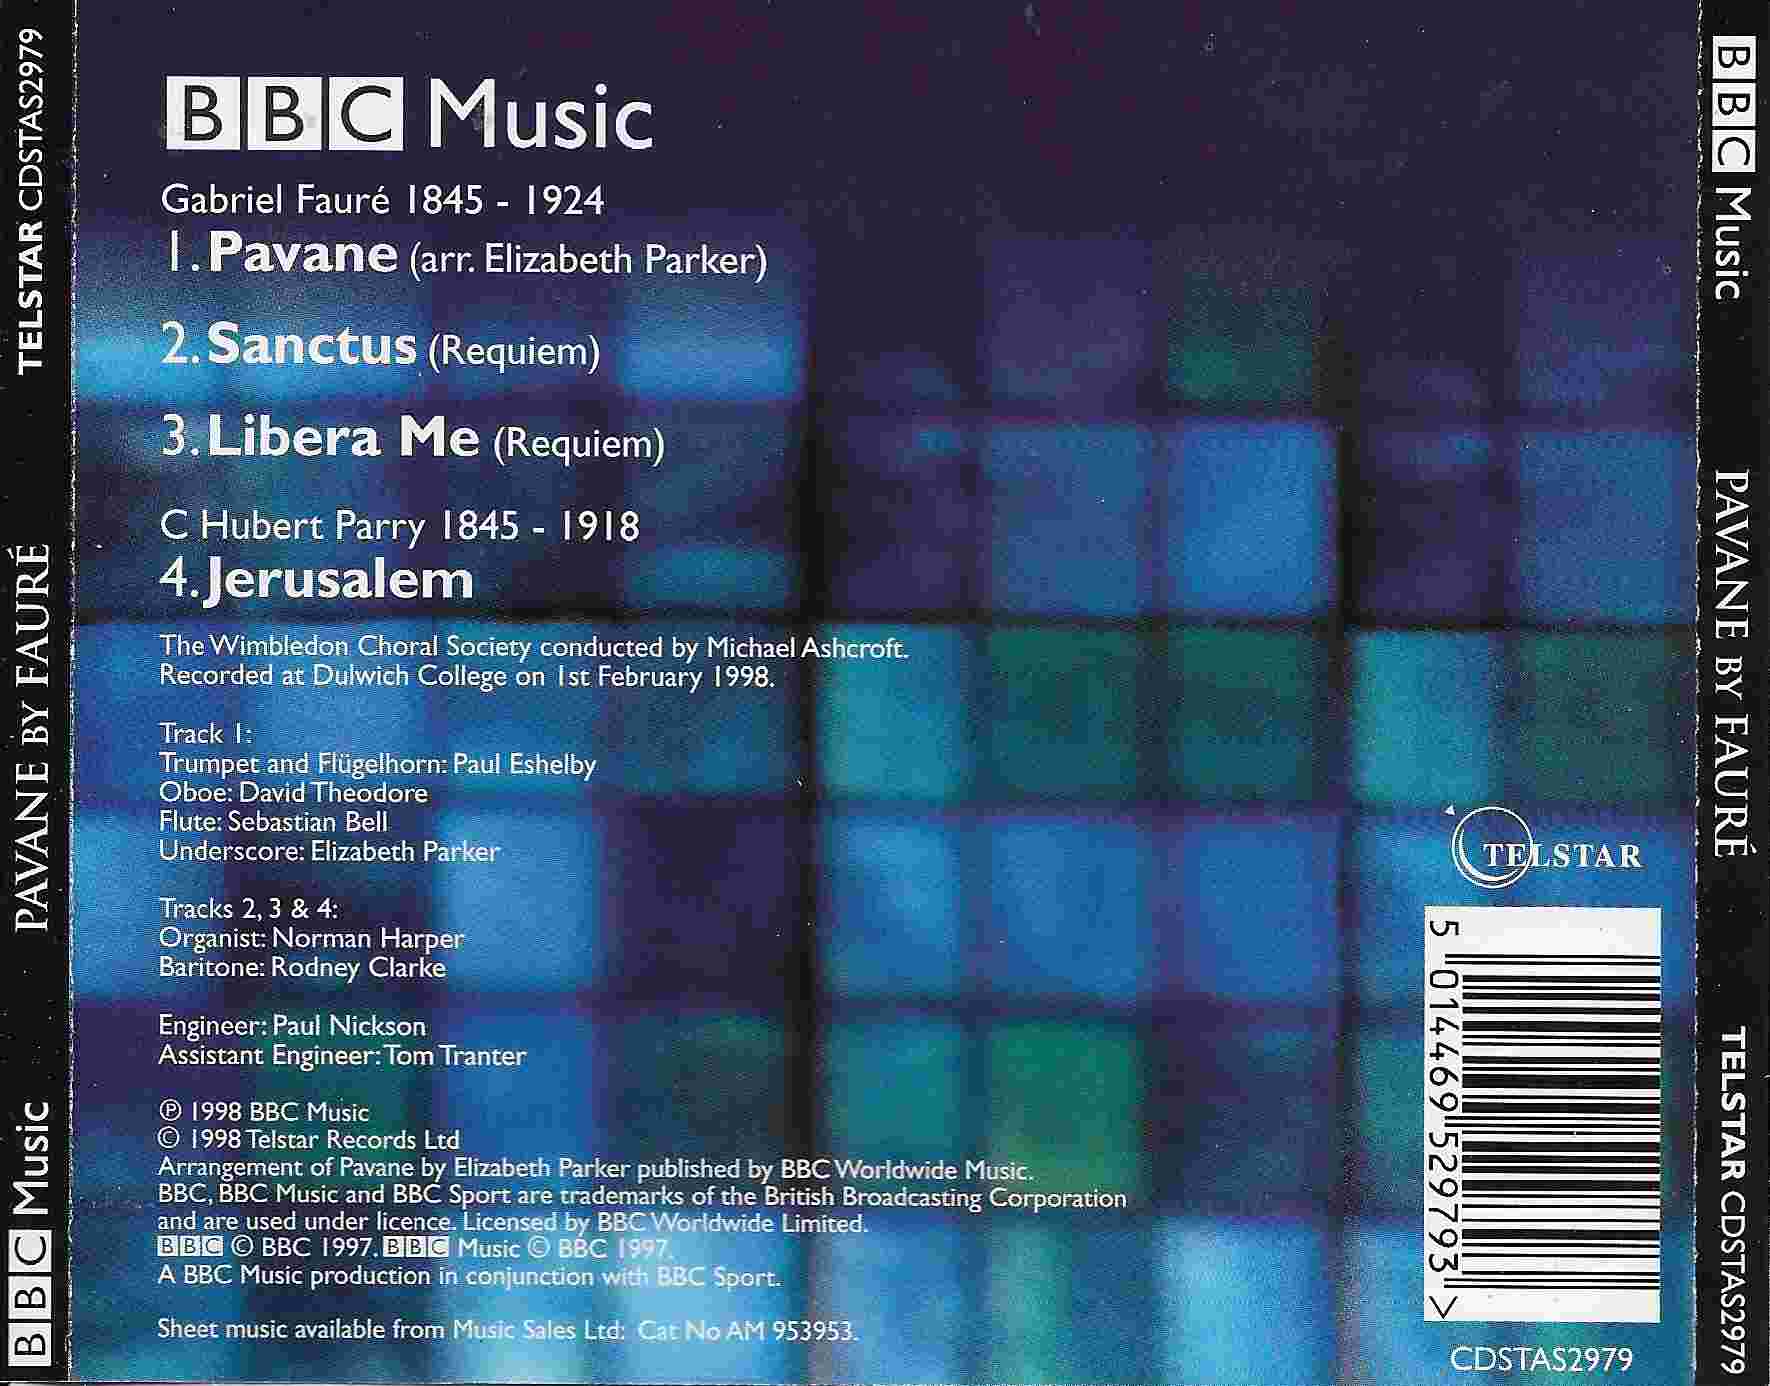 Back cover of CDSTAS 2979